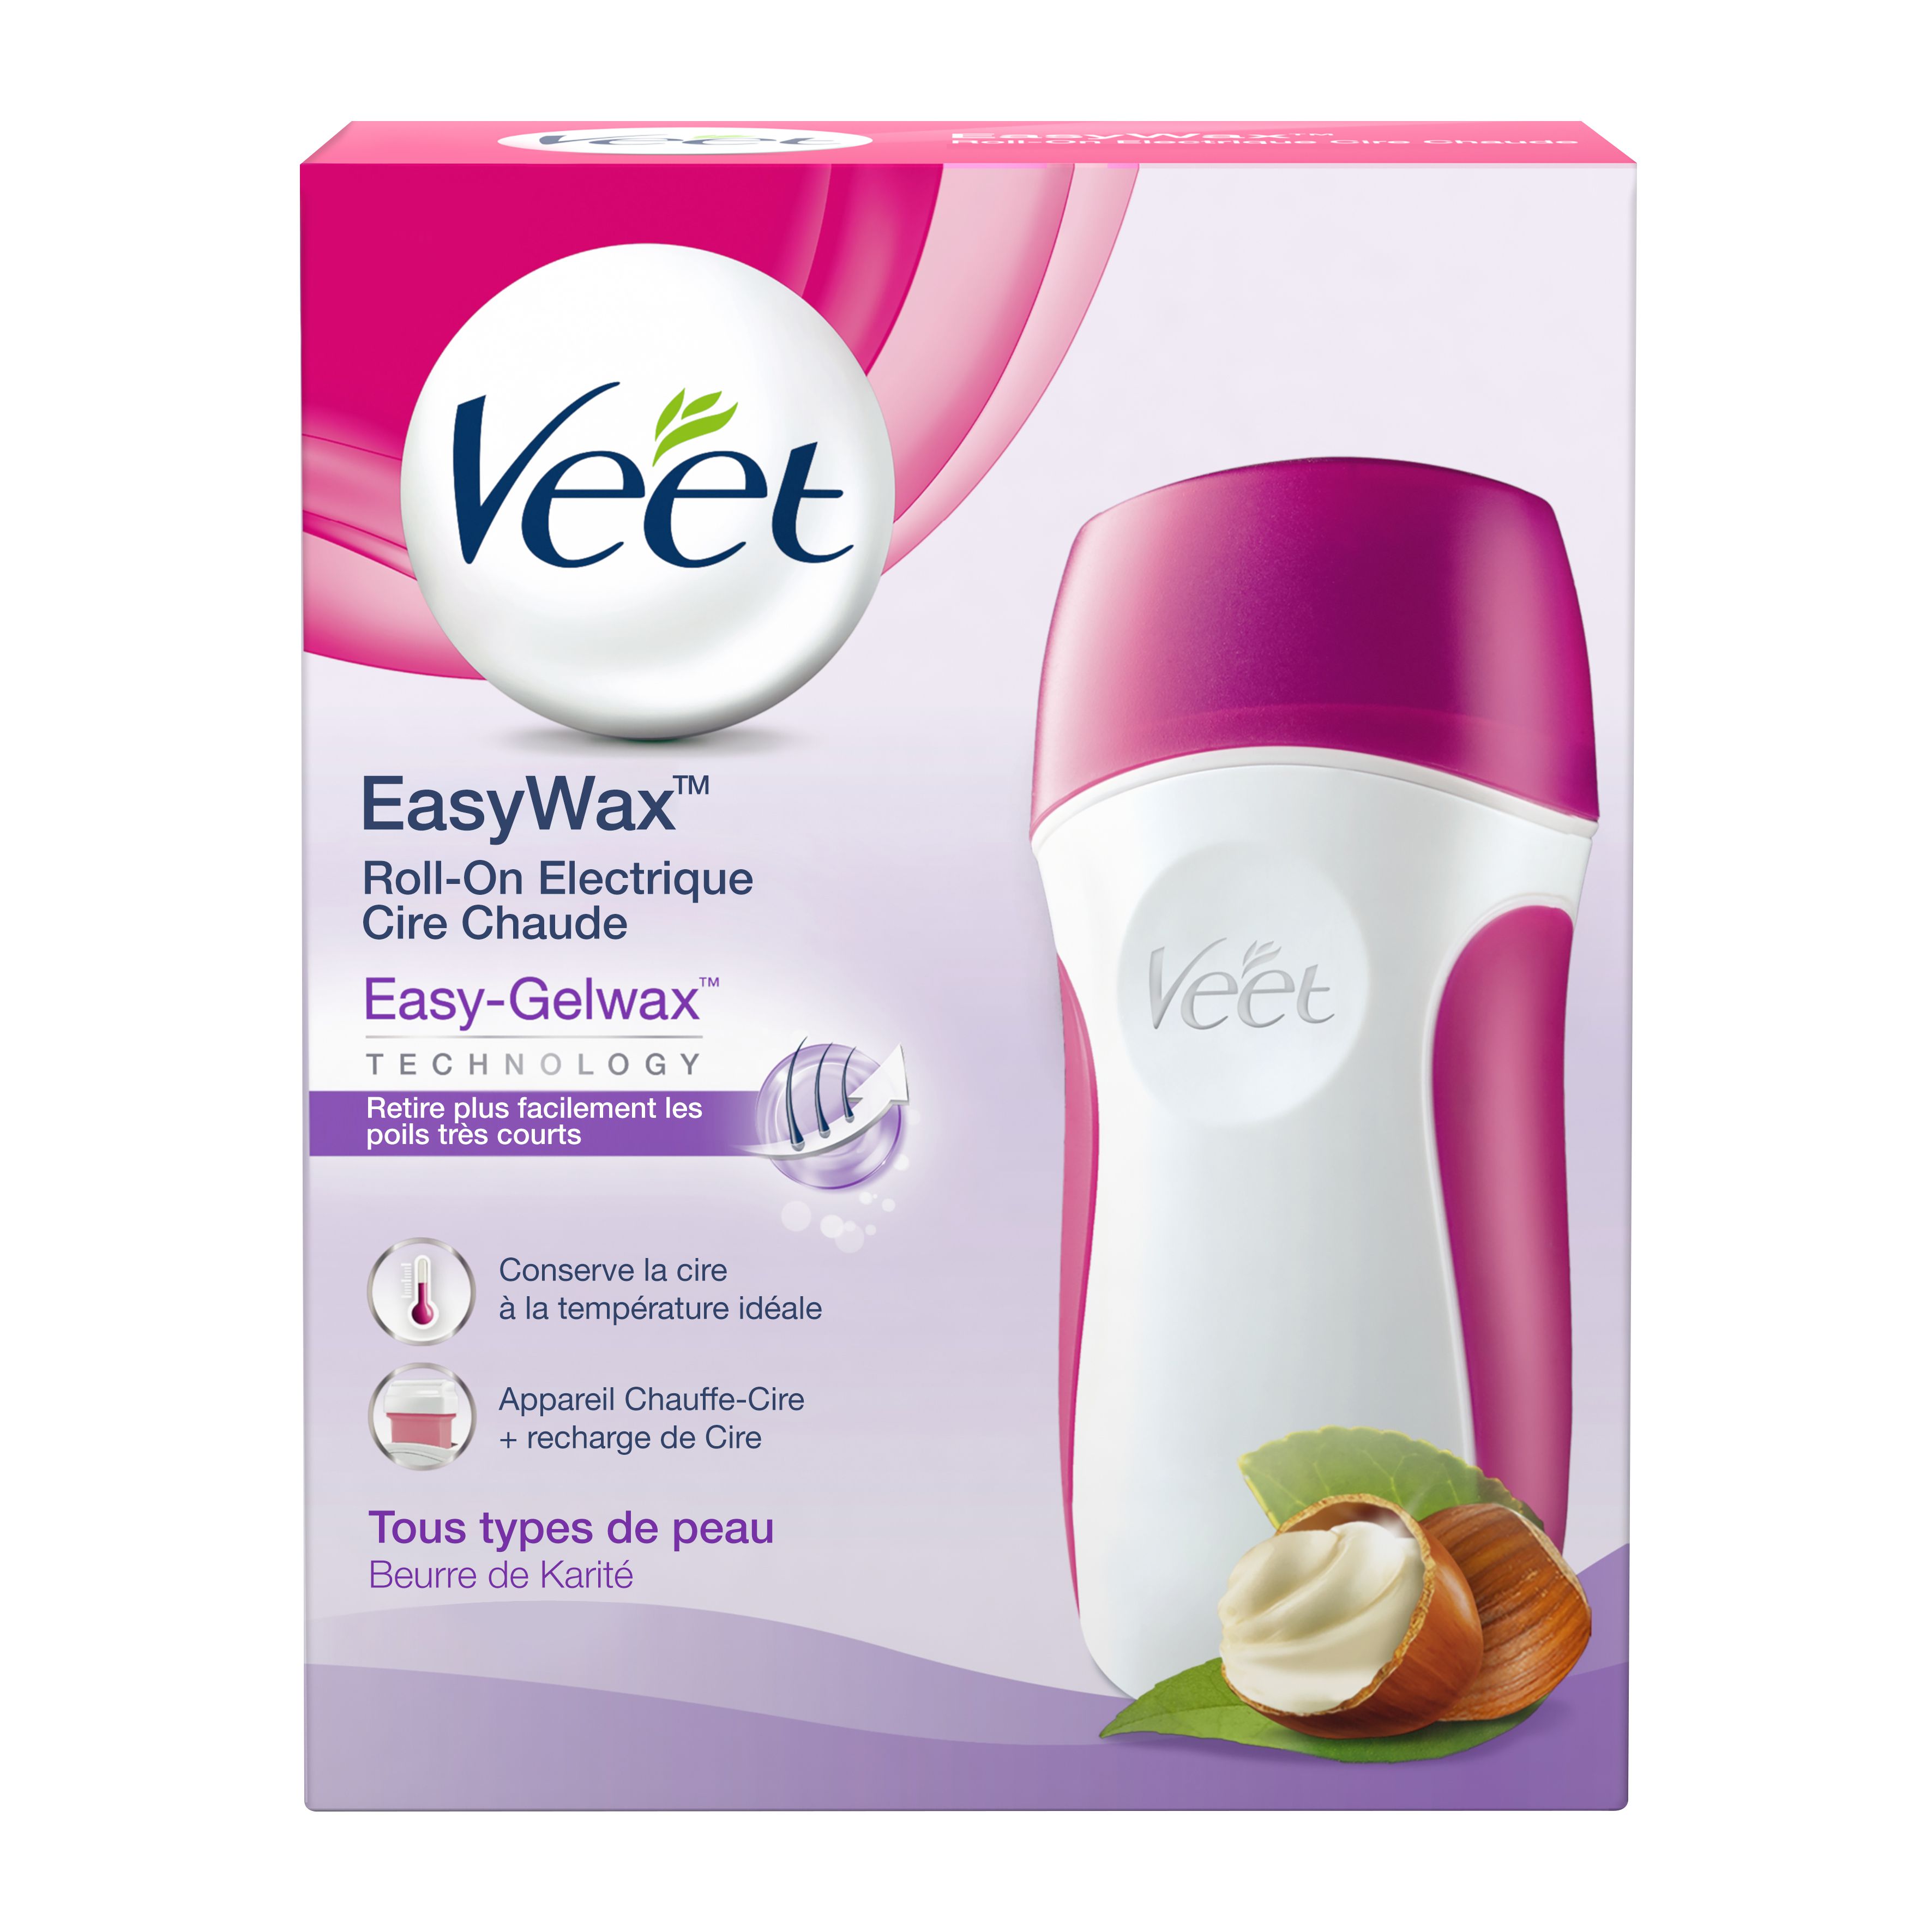 Roll-on cire chaude EasyWax™ | Veet